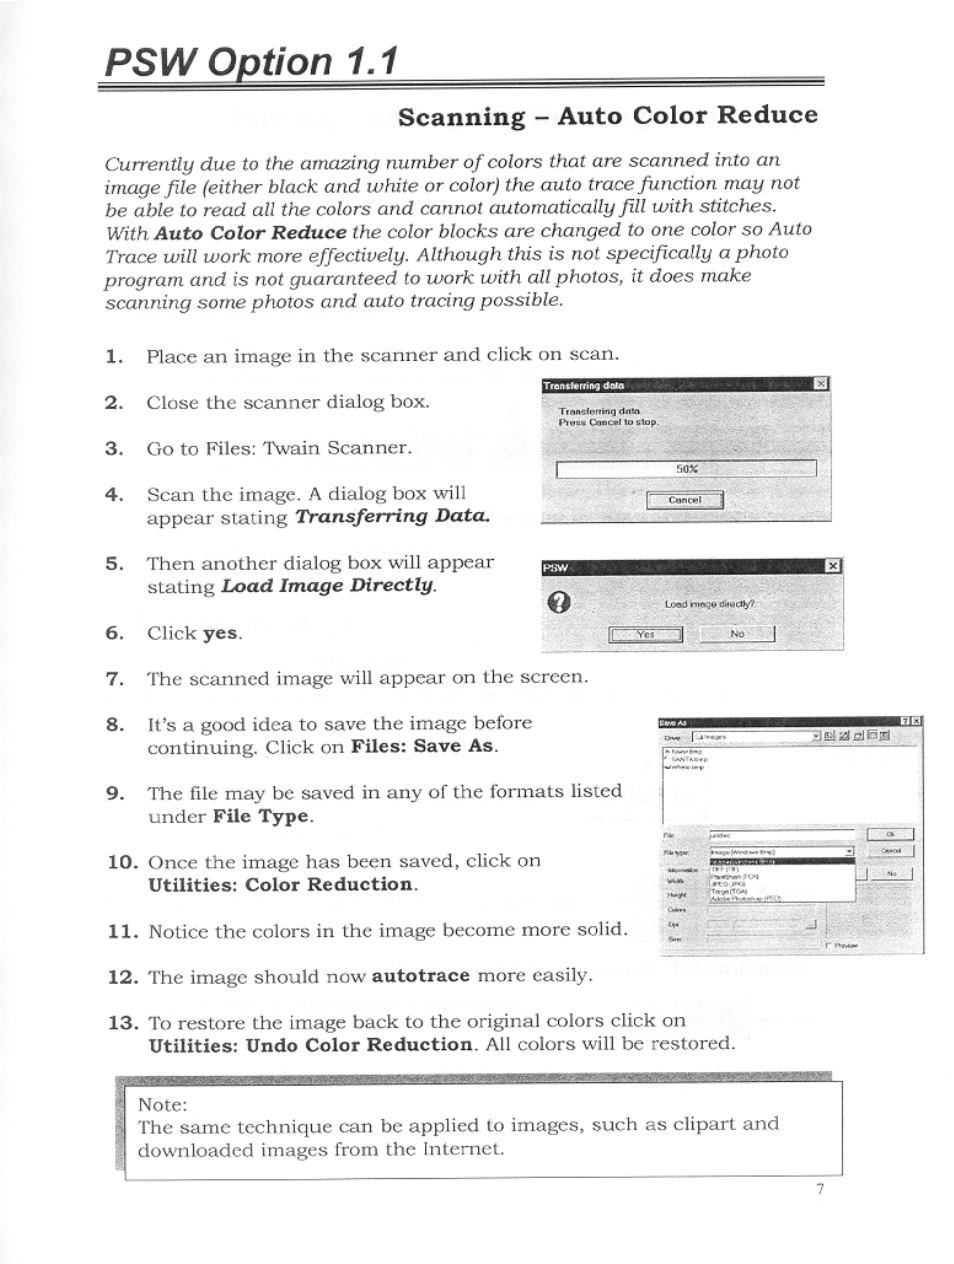 Psw option 1.1, Scanning - auto color reduce | SINGER S10 User Manual | Page 10 / 16